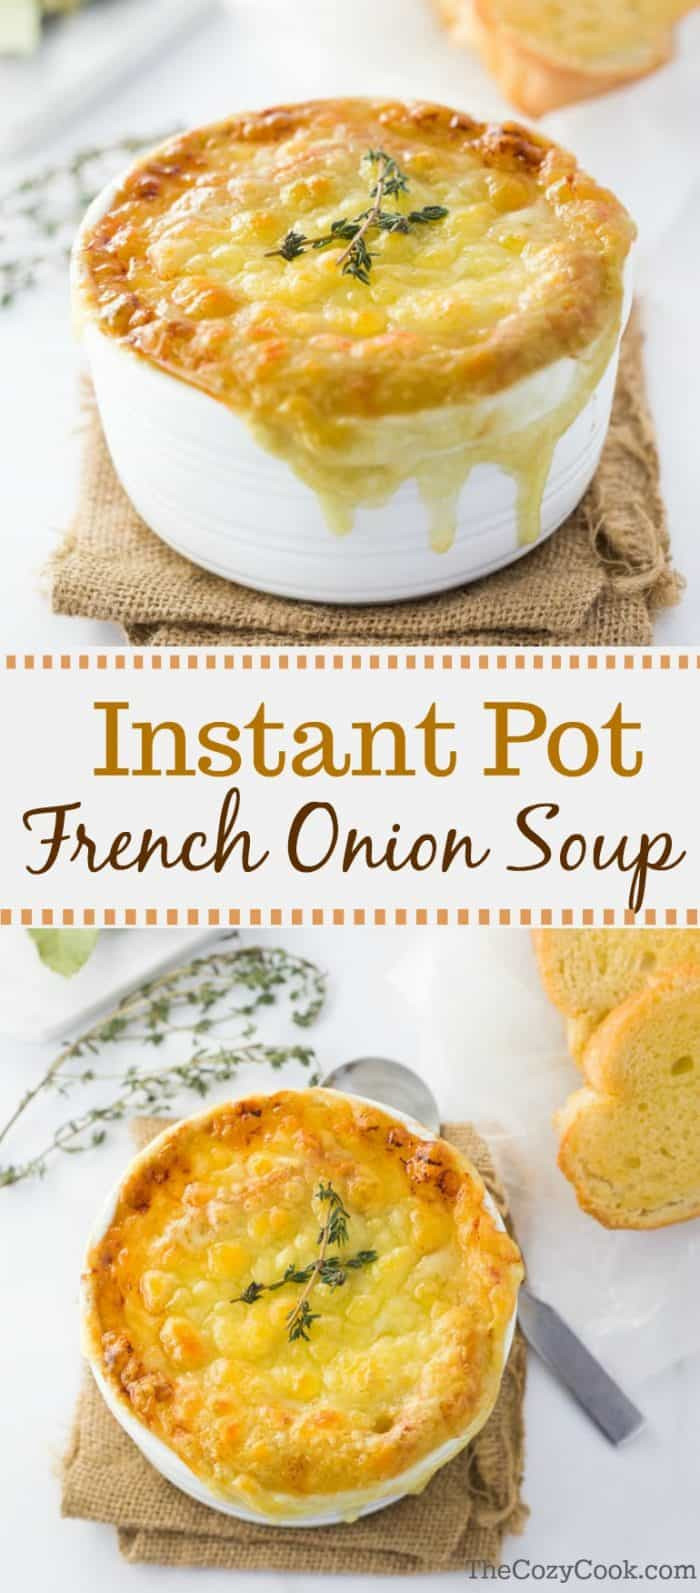 French Onion Soup Instant Pot
 Instant Pot French ion Soup The Cozy Cook